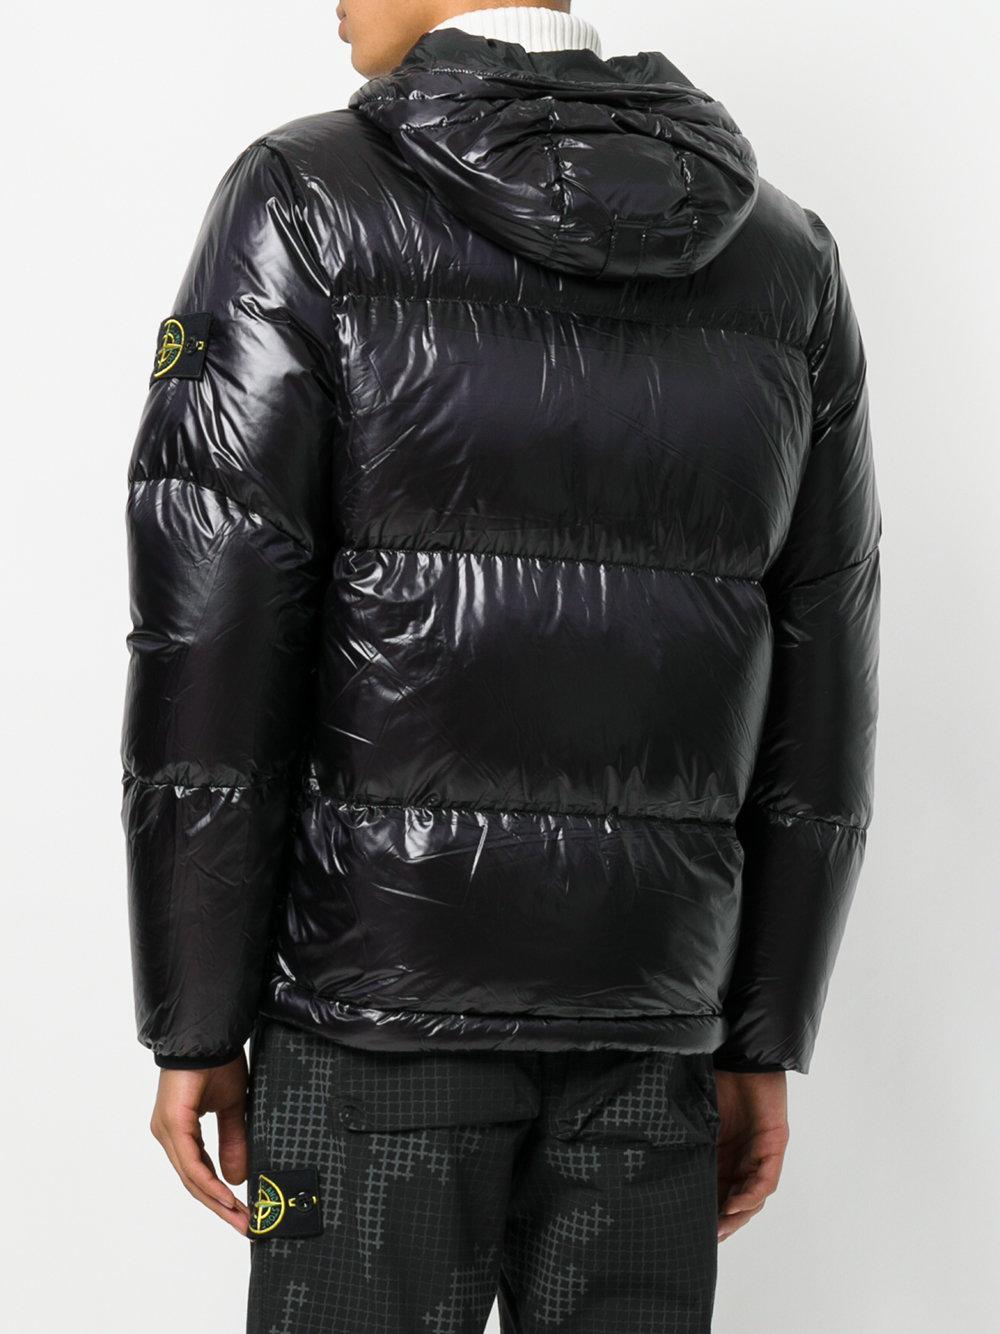 Stone Island Glossy Puffer Jacket in Black for Men - Lyst